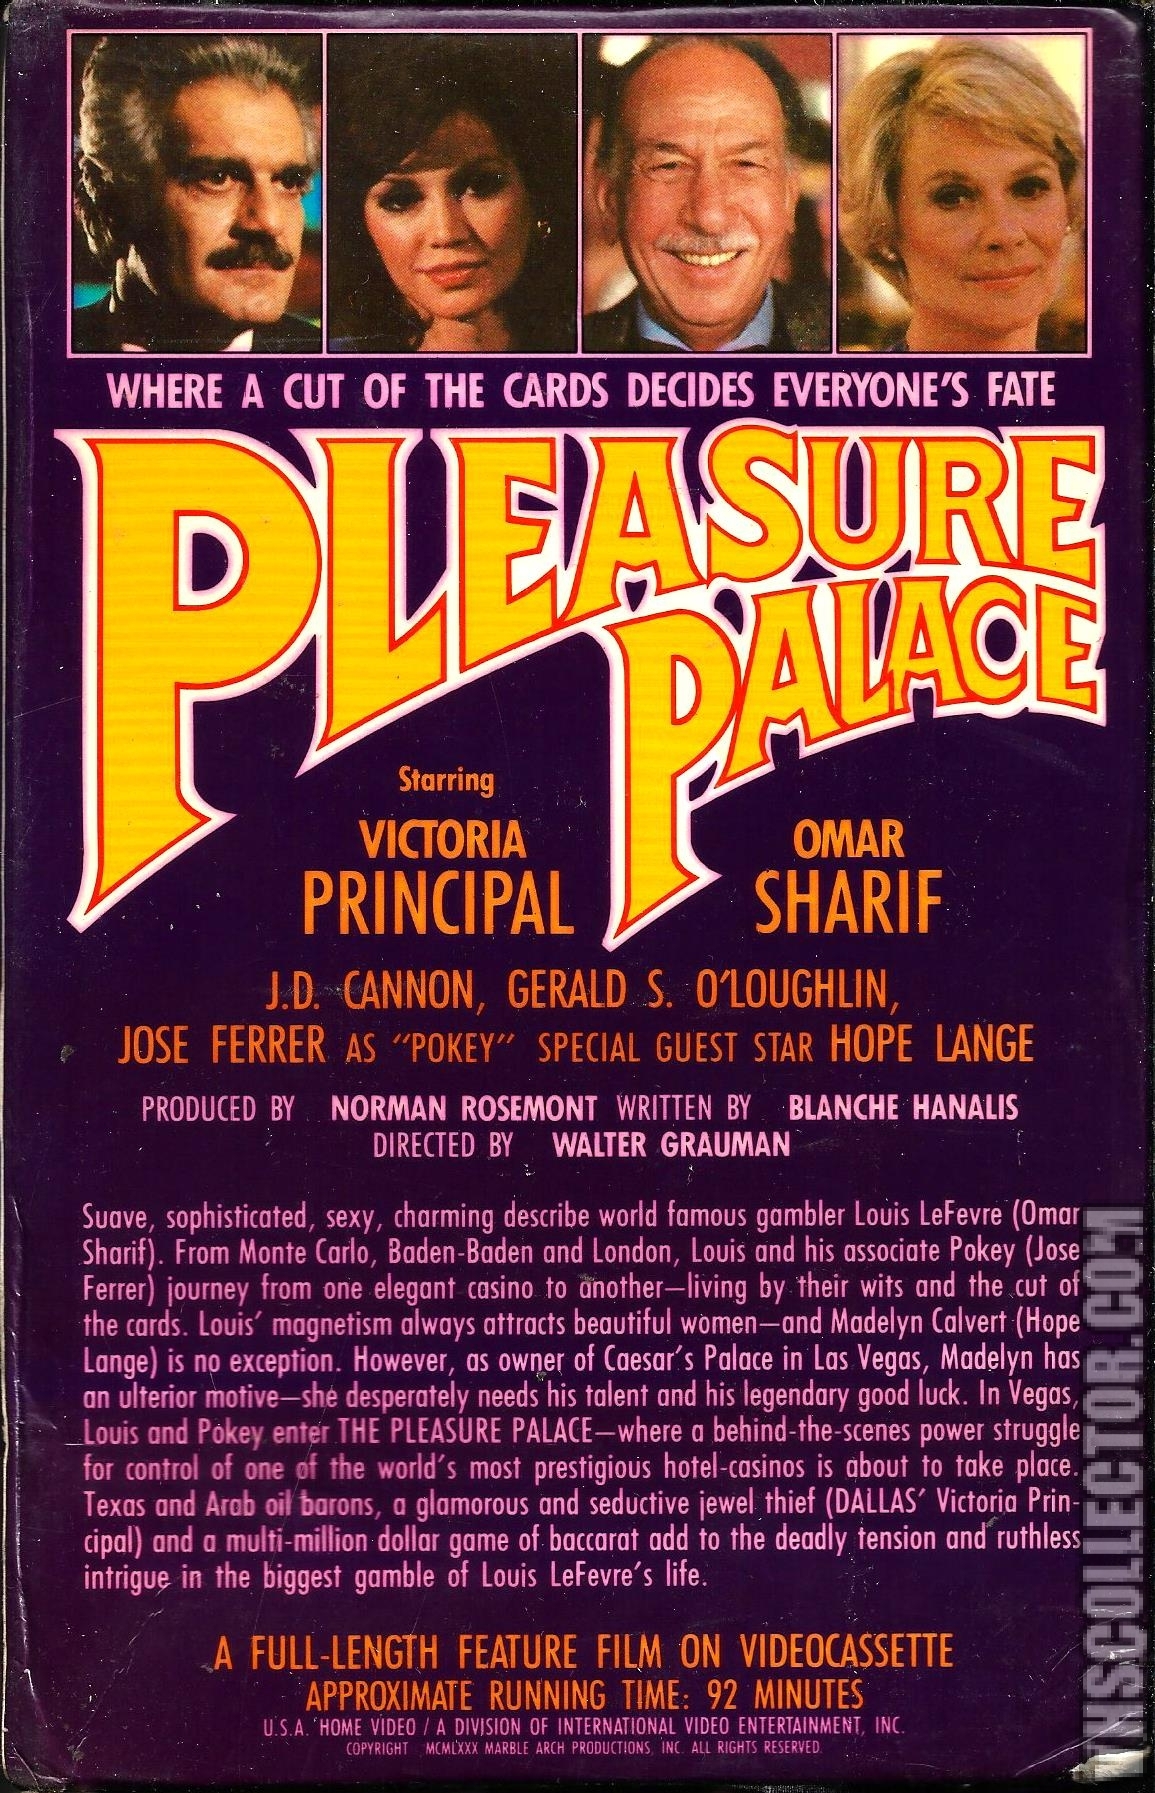 A Night At The Pleasure Palace